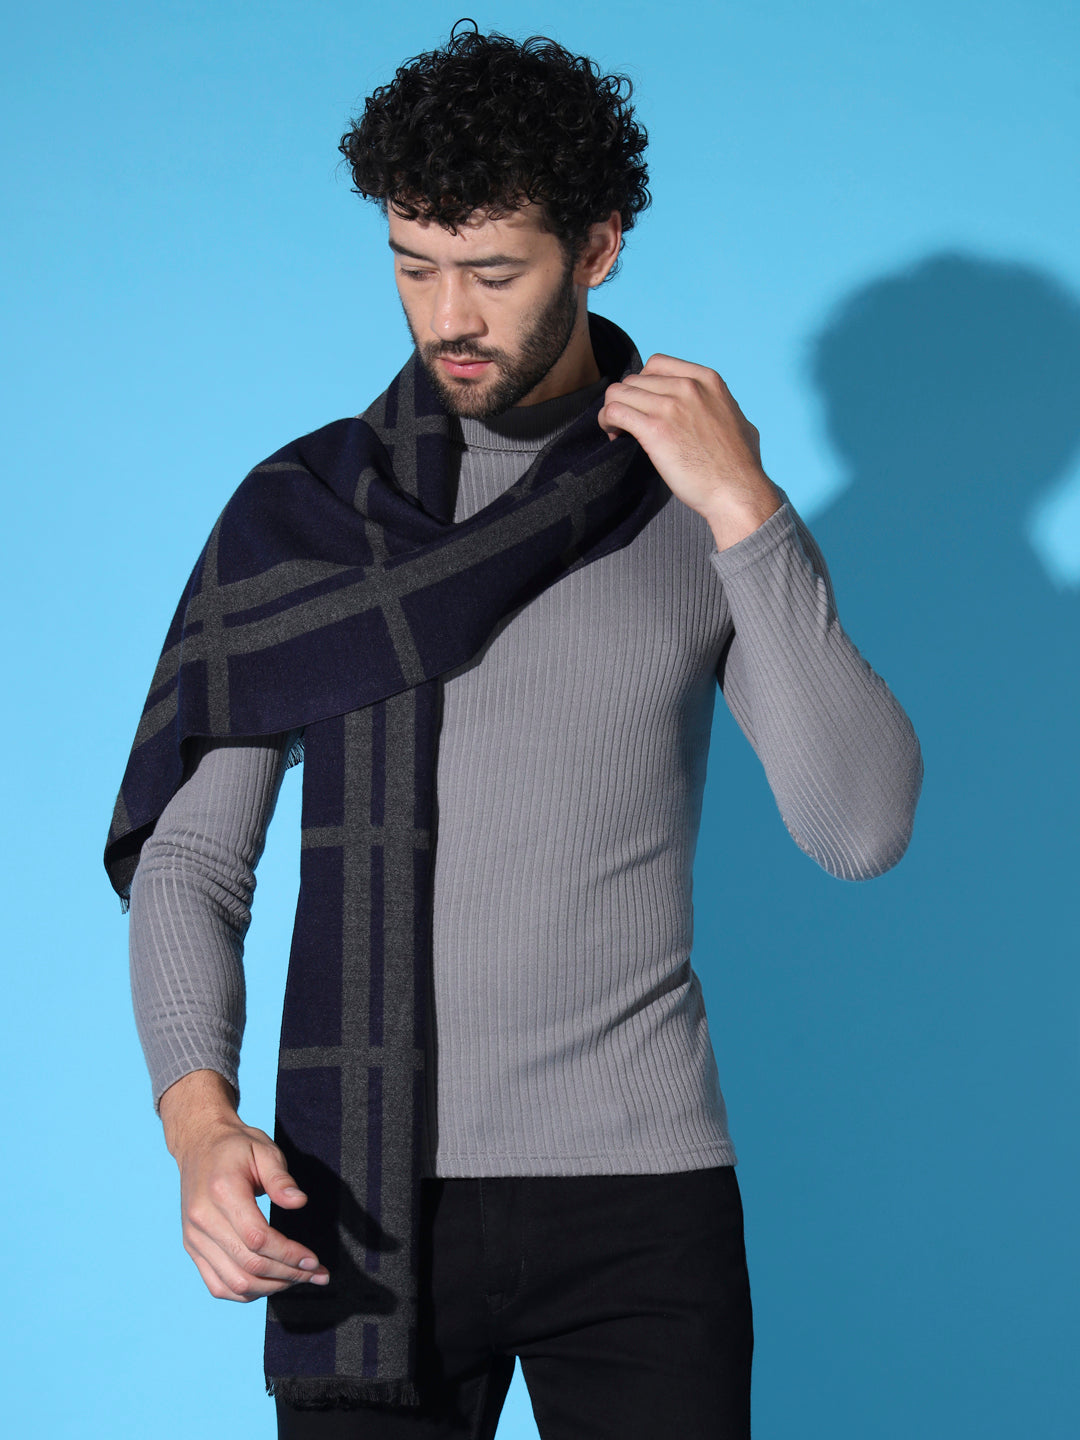 mens mufflers for winter, gifts for men